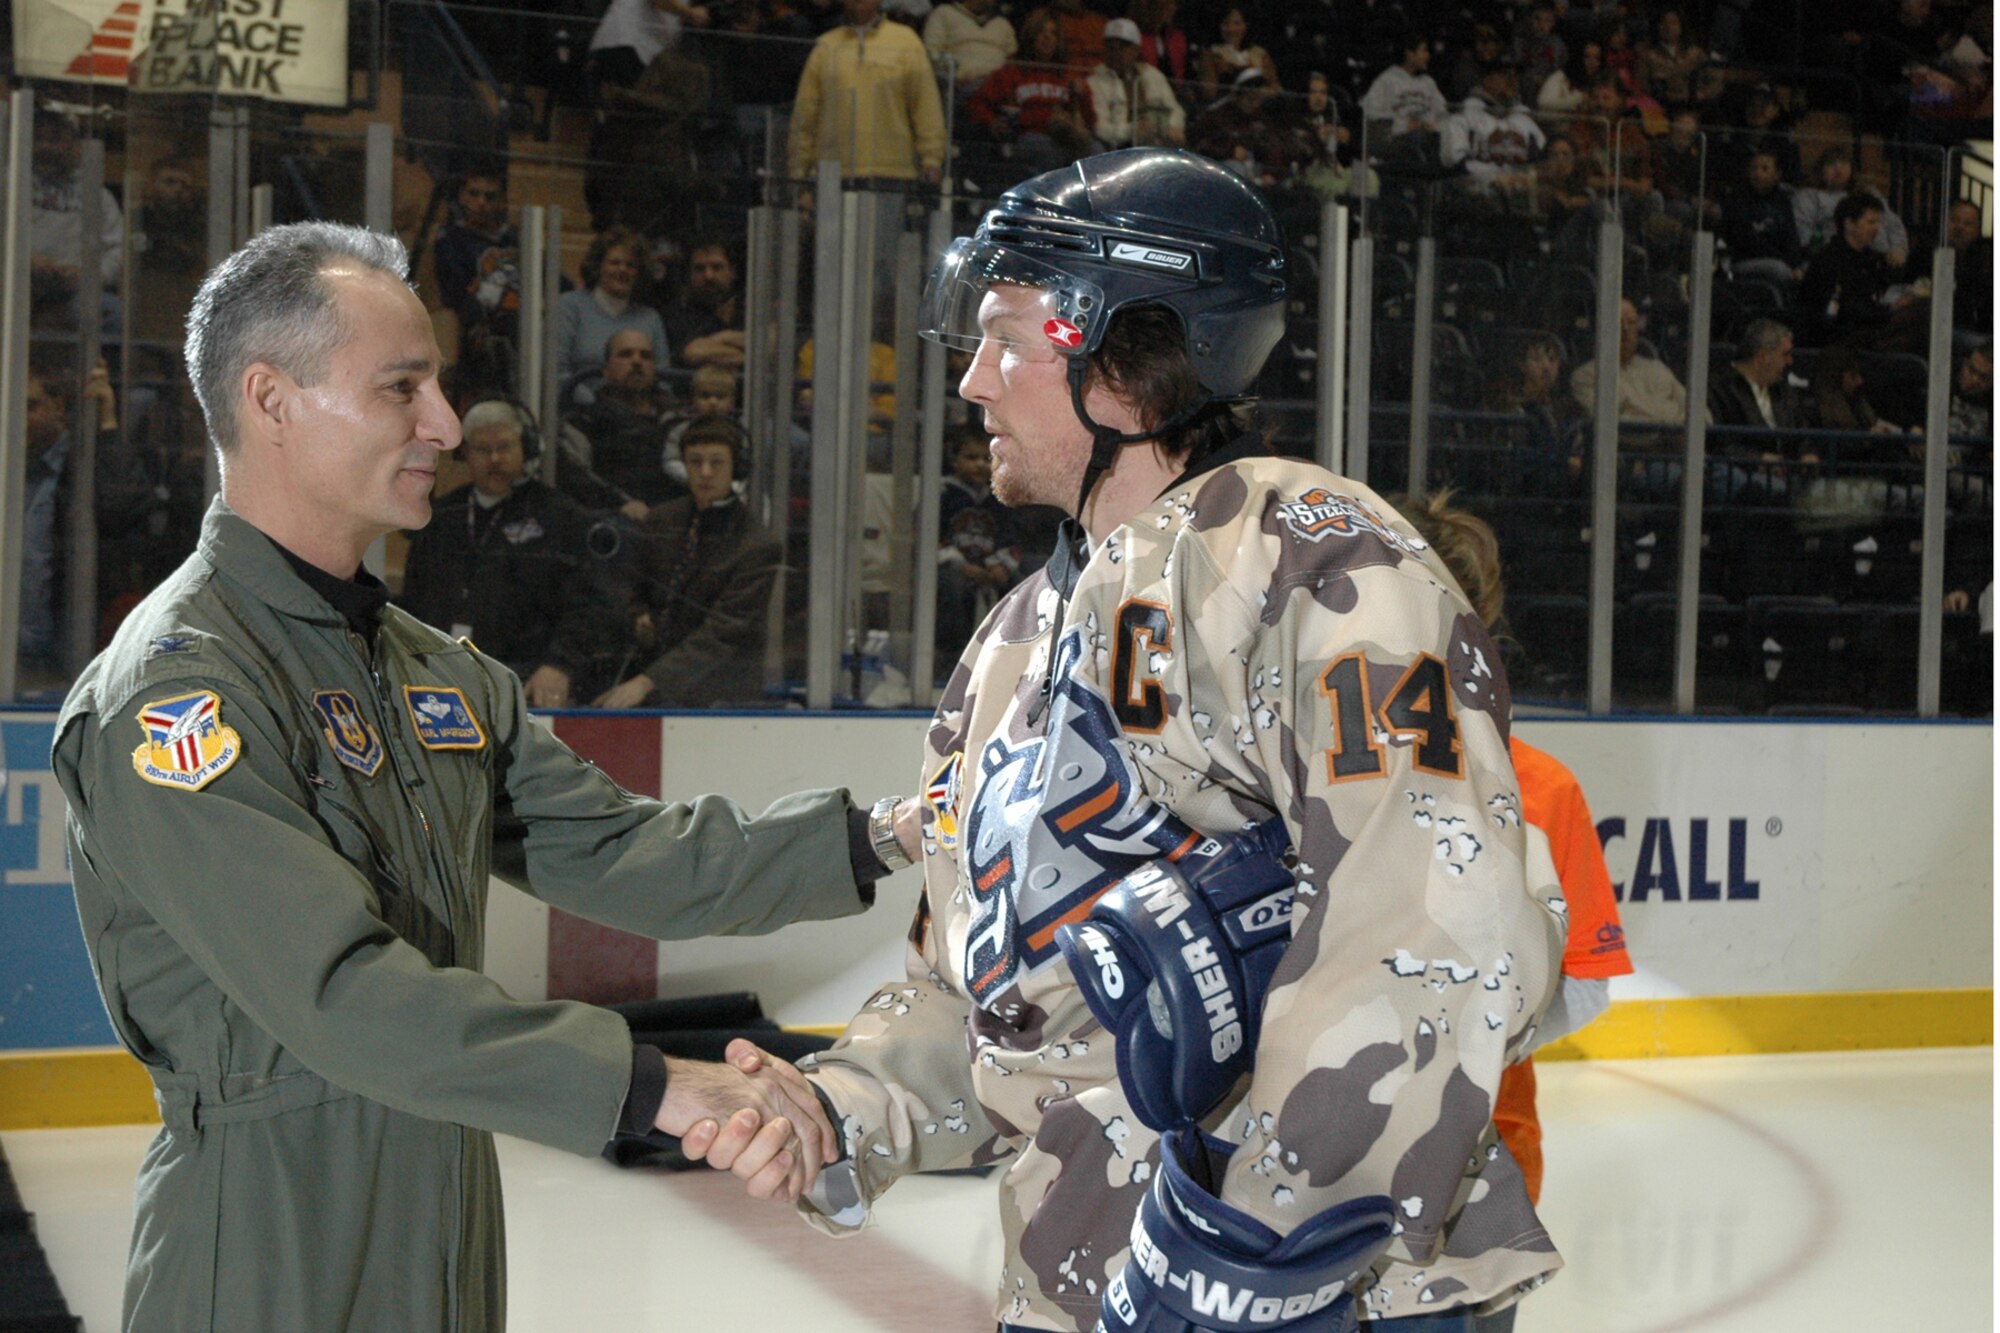 YOUNGSTOWN, Ohio – Air Force Reserve Col. Karl McGregor, commander of the 910th Airlift Wing, presents his Commander's Coin of Excellence to Chris Richards, Captain of the Youngstown Steelhounds hockey team at the Chevrolet Centre Jan. 19, 2008 during Military Night ceremonies prior to the Steelhounds game against their CHL rival Shreveport Mudbugs. U.S. Air Force photo/Tech. Sgt. Bob Barko Jr.